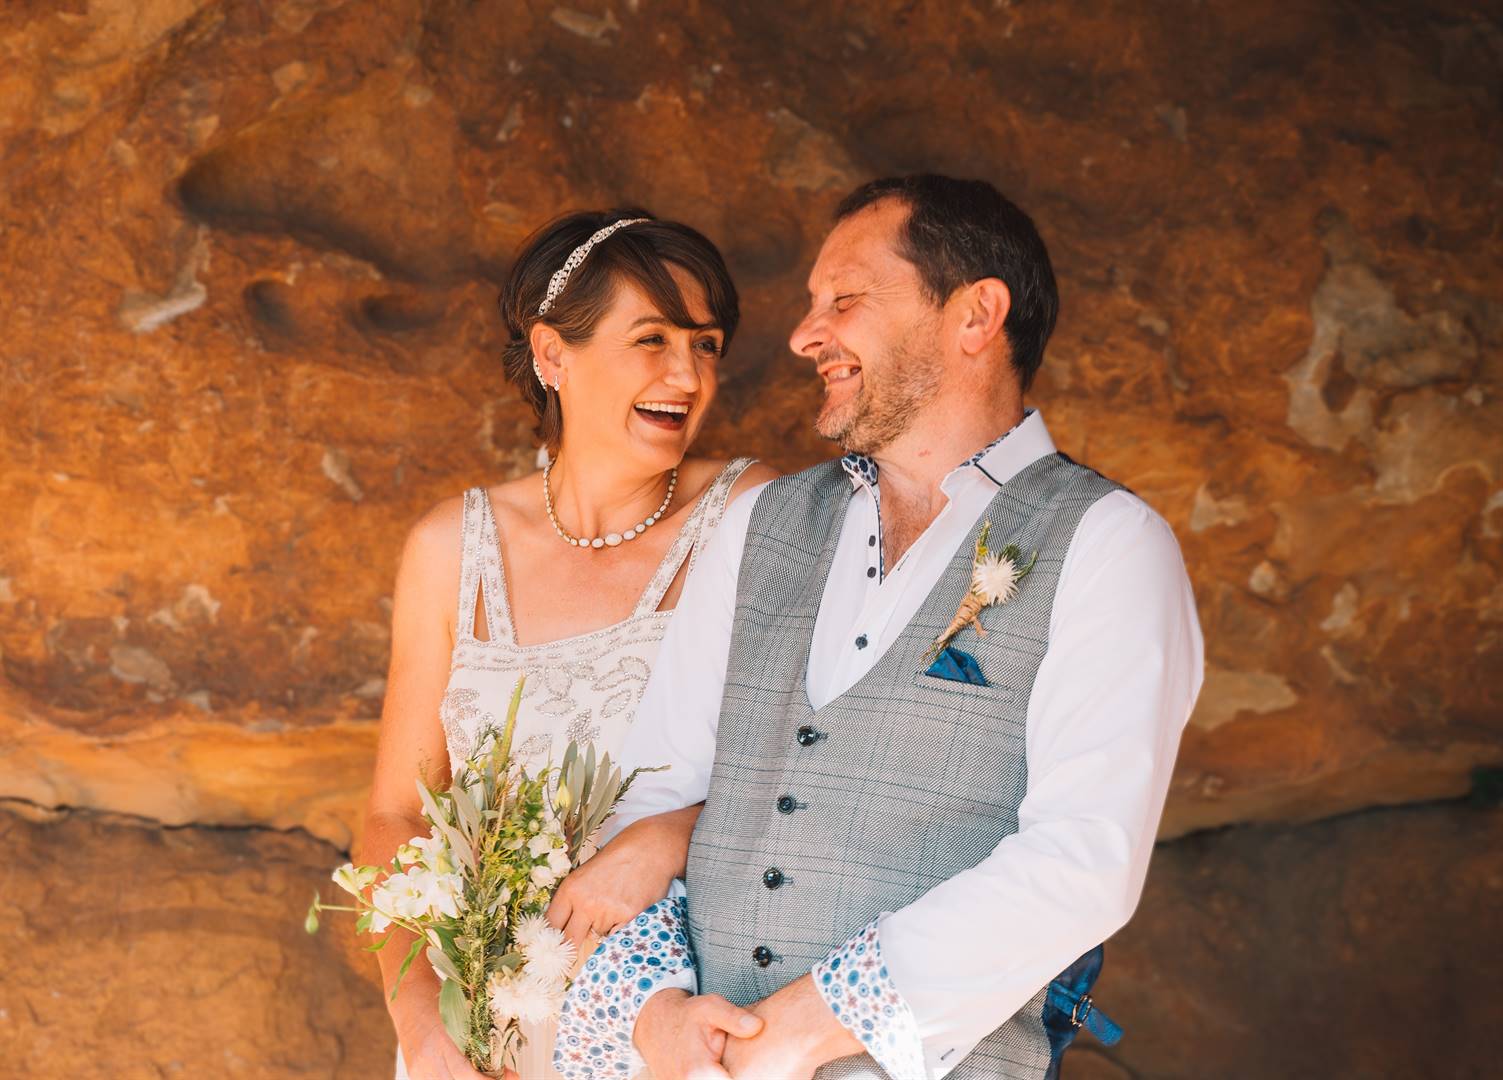 Celia Geyer and David Barlow on their wedding day in the Cederberg. 